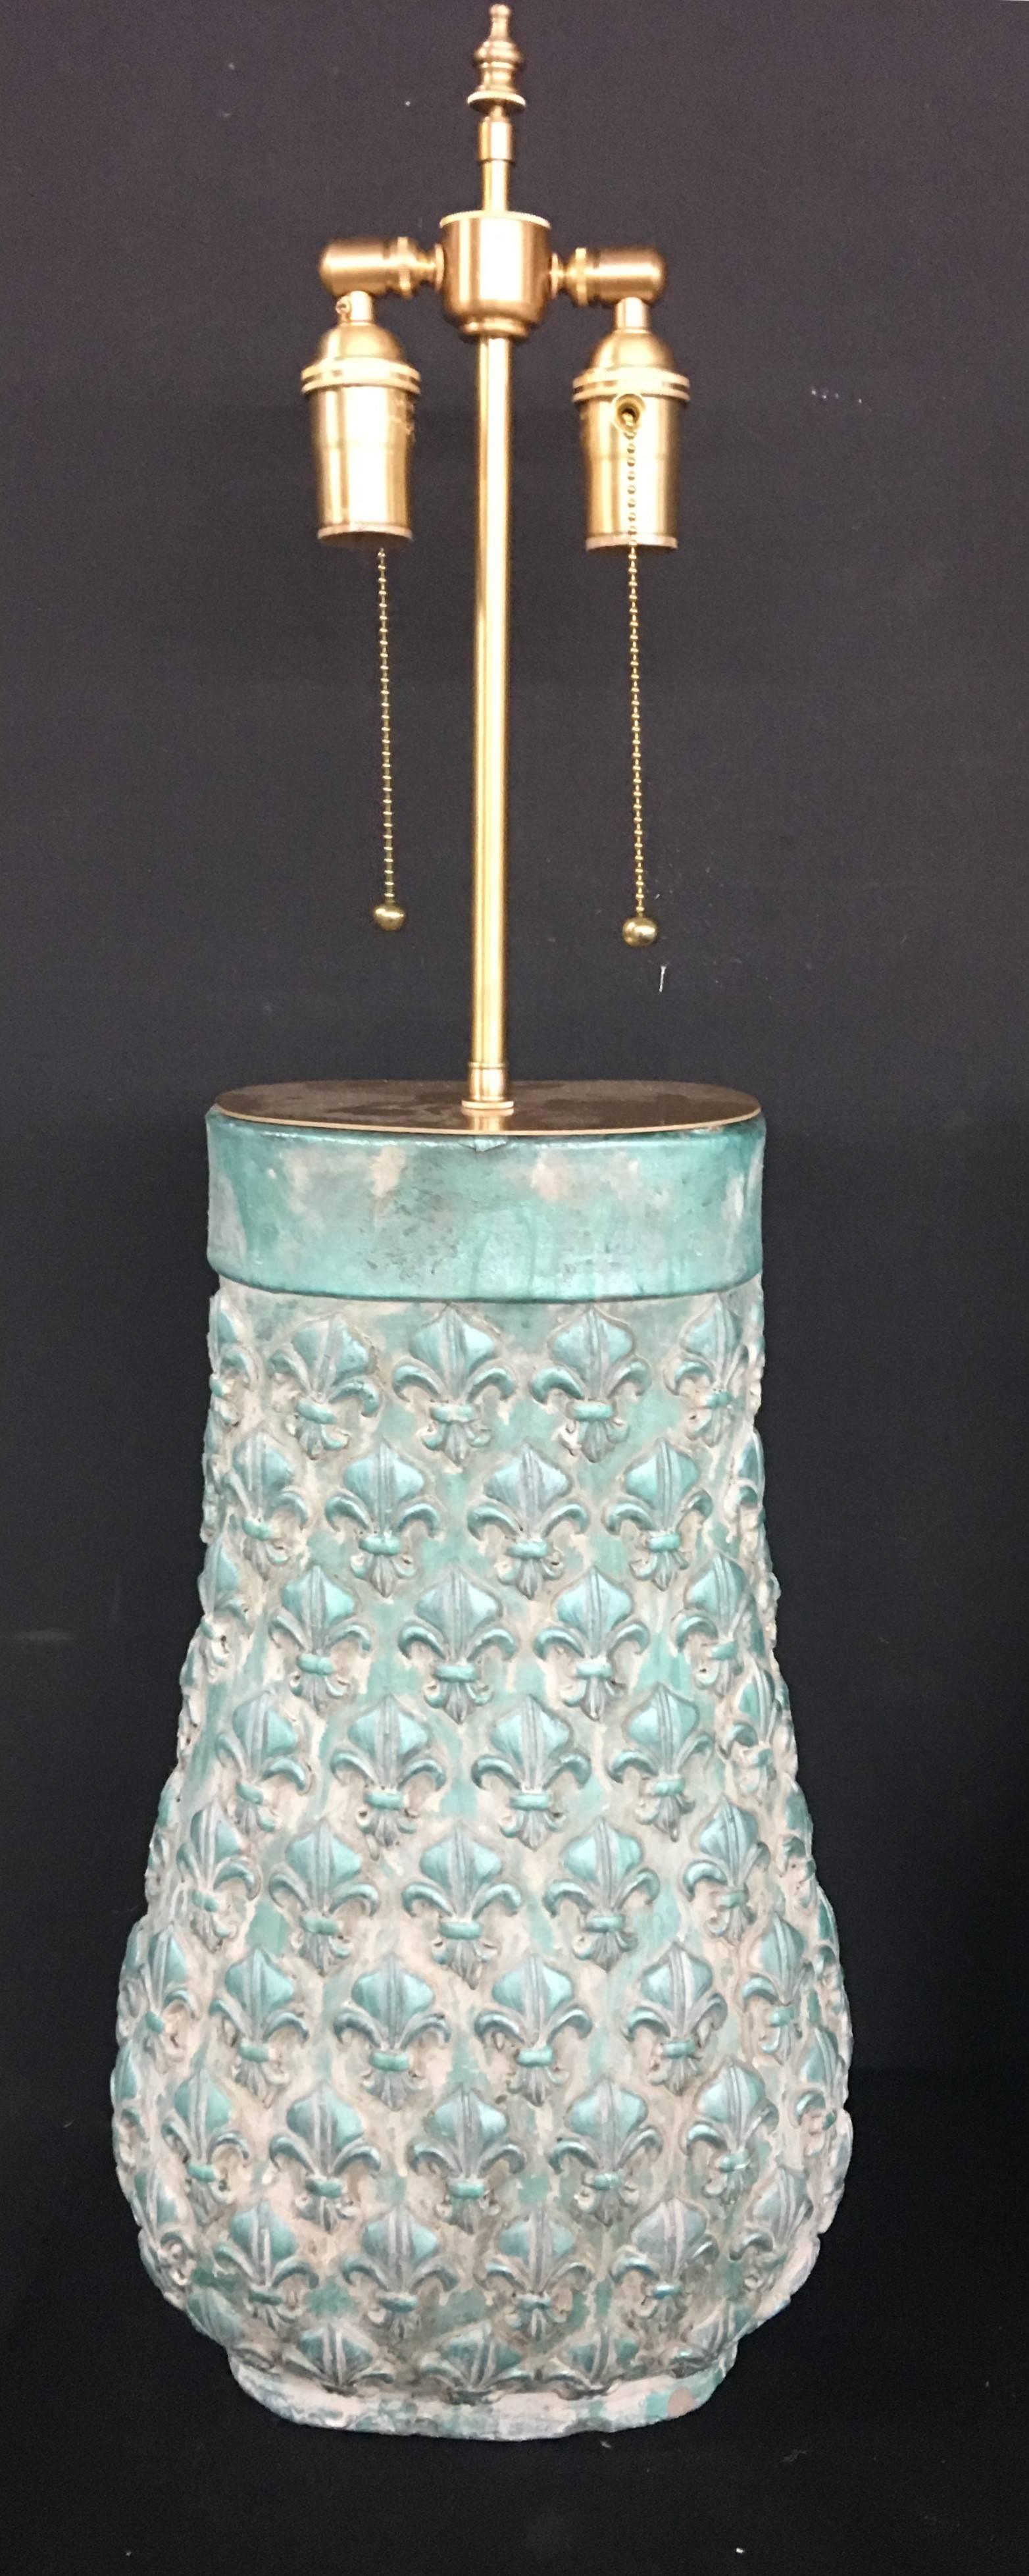 Unusual pair of molded clay vases with lamp application. The vessels have a raised fleur-de-lis pattern in a white wash over a pale blue background. The hardware is brushed Brass. The vessels are 19.5